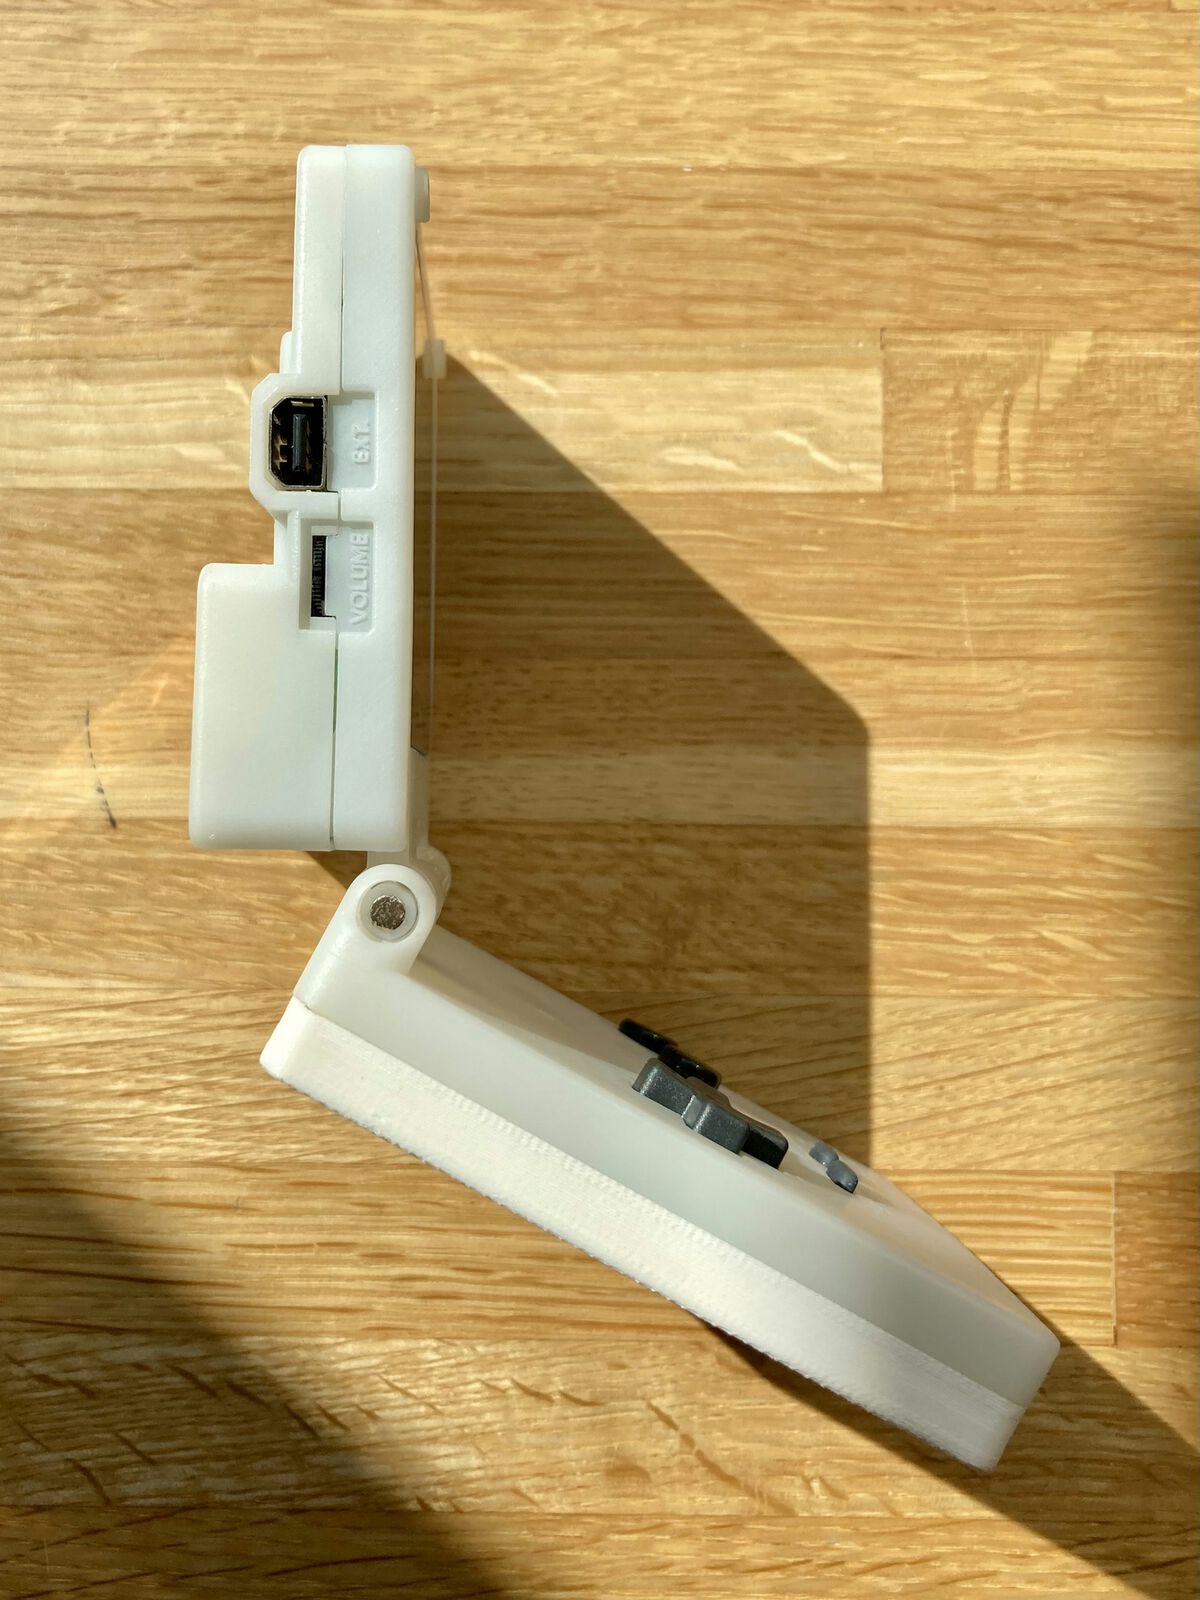 Profile of the Pocket SP, where the bottom outside is cream-colored FDM ABS, and the other parts are semi-translucent white resin